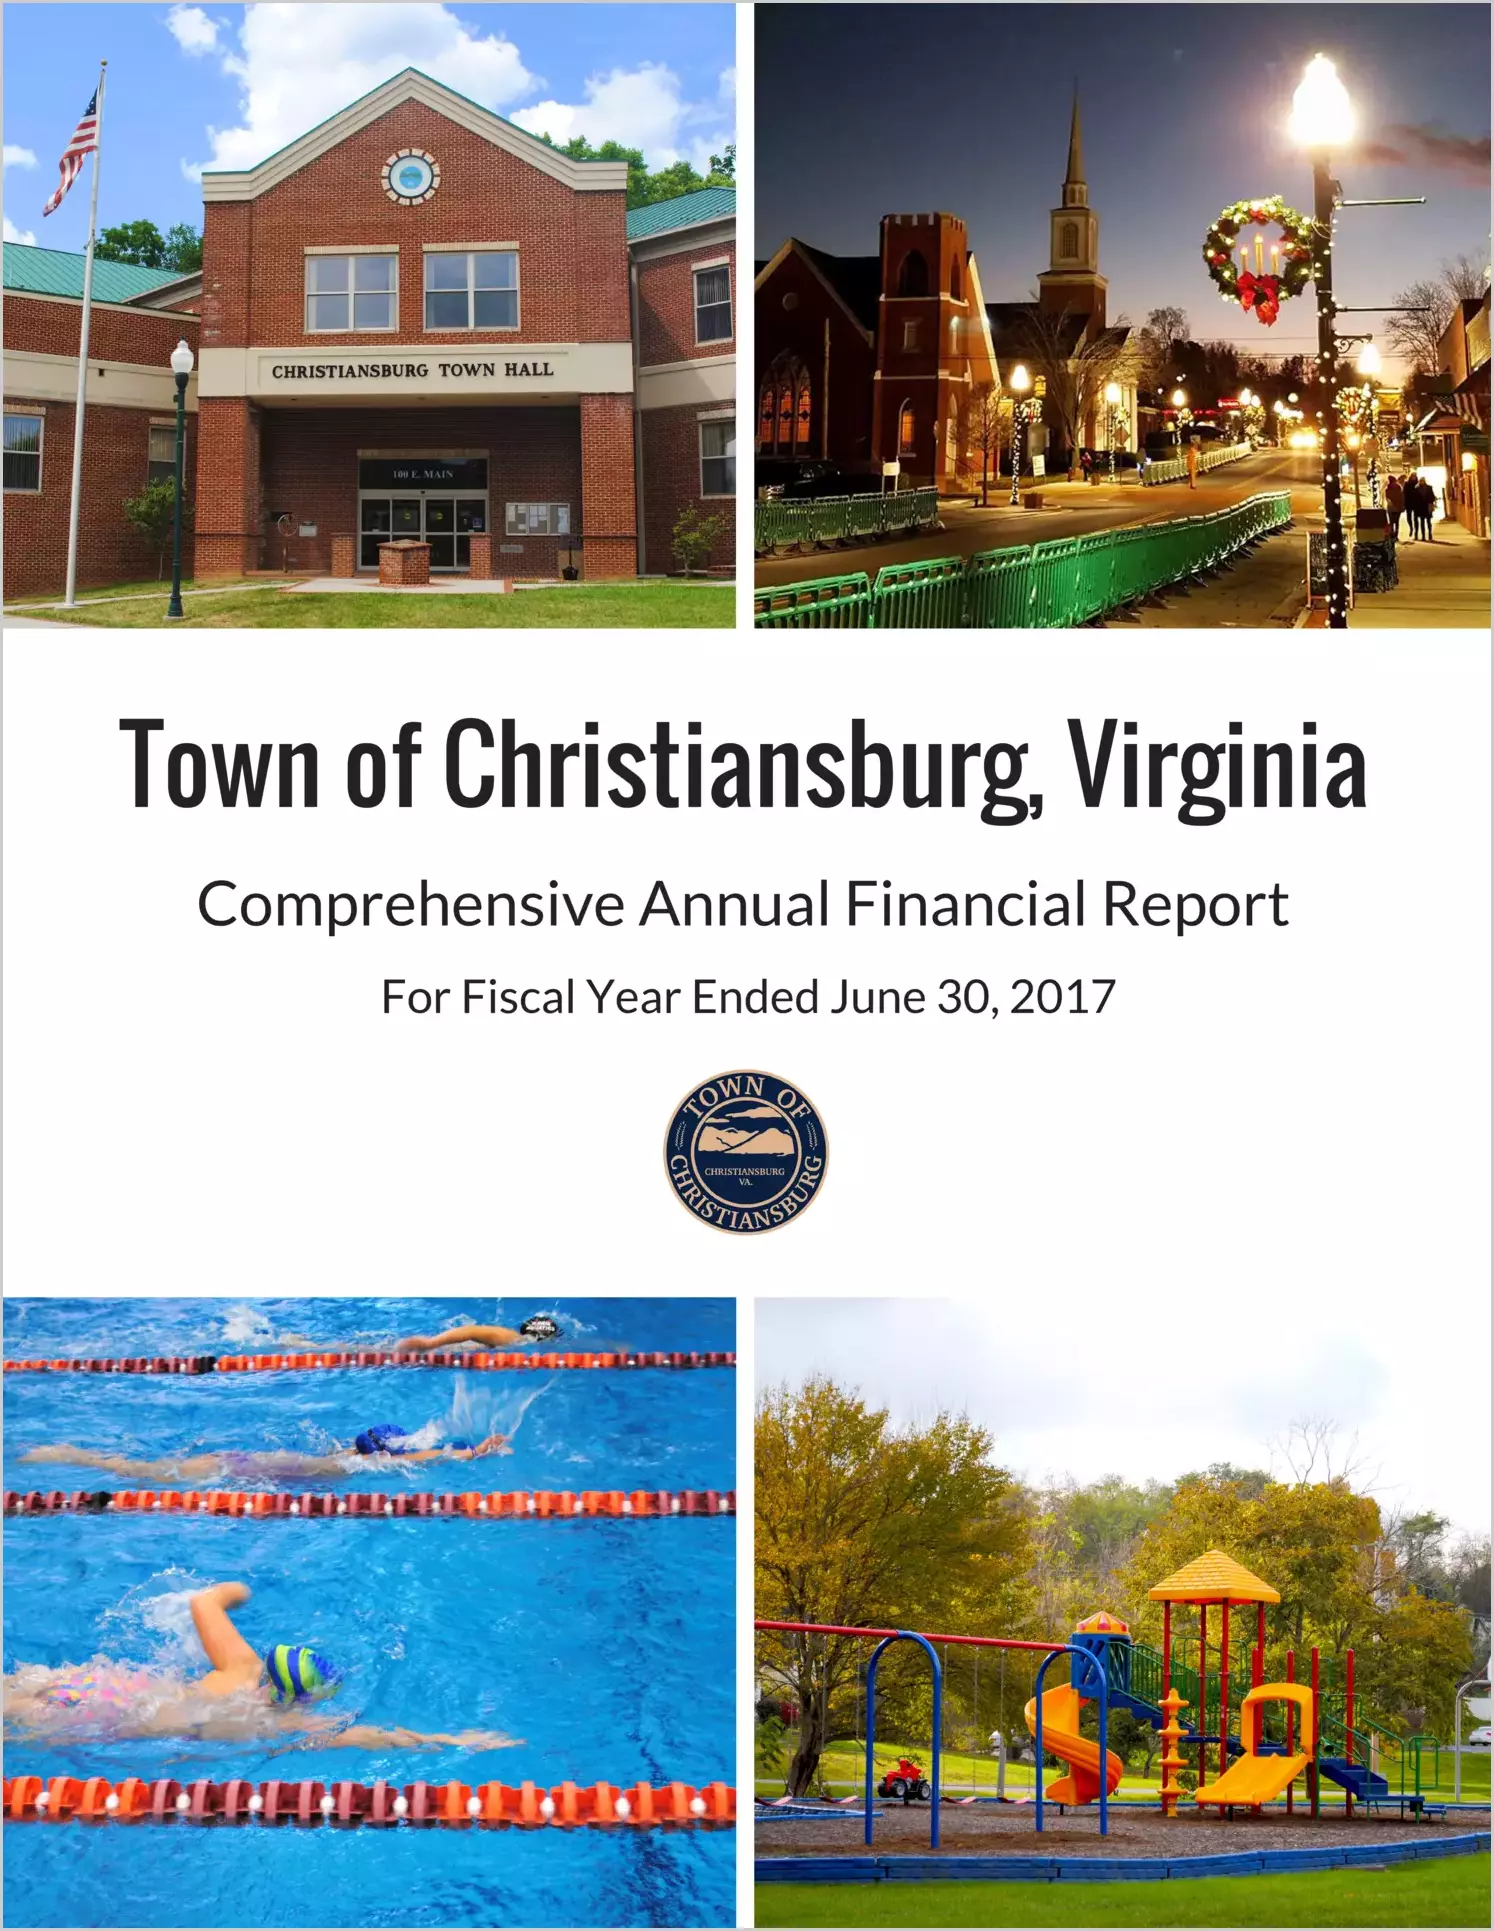 2017 Annual Financial Report for Town of Christiansburg